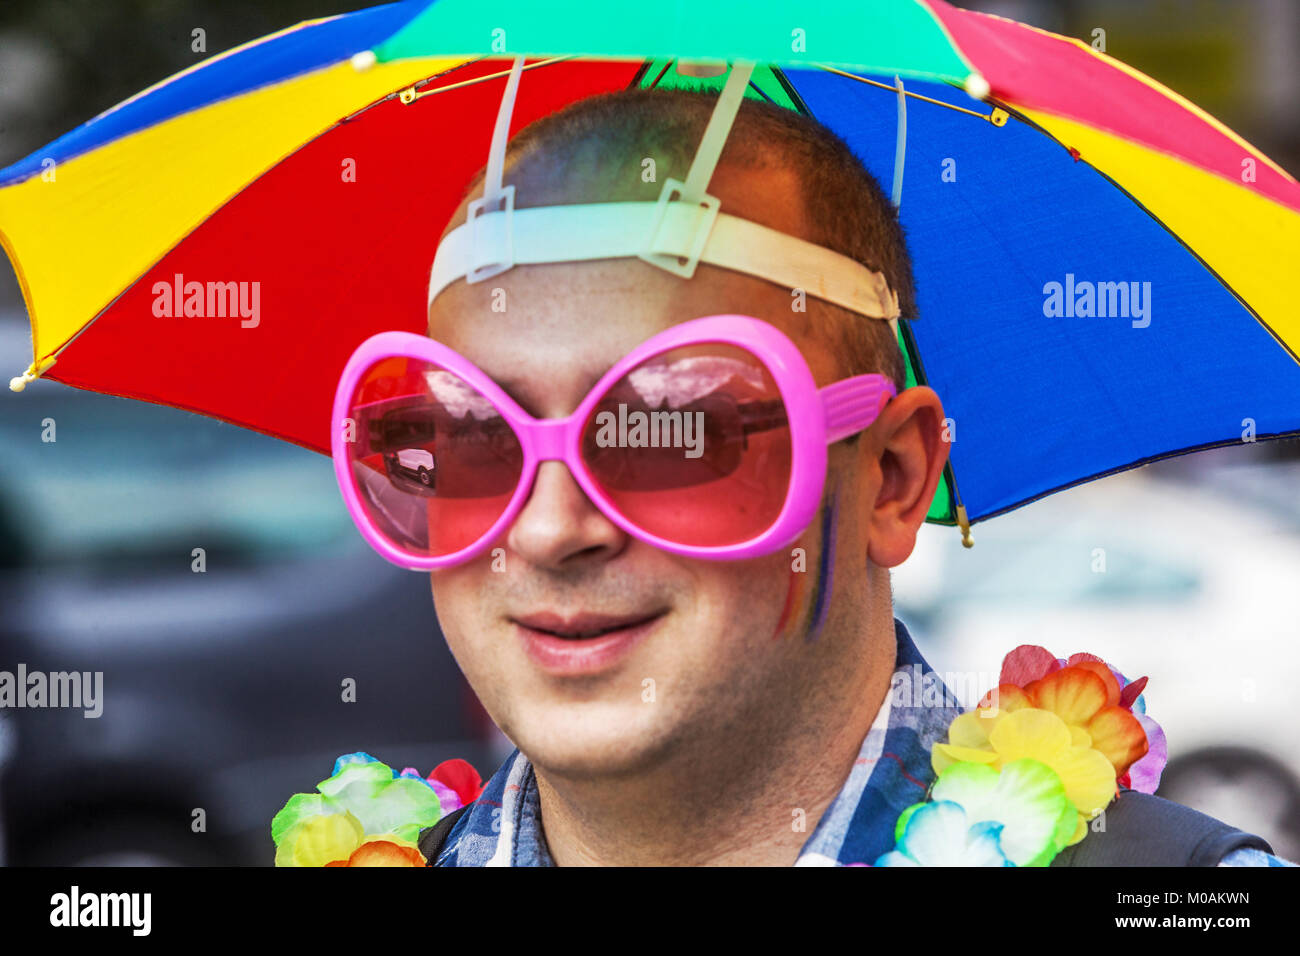 LGBT fashion, man with pink sunglasses and umbrella hat Stock Photo